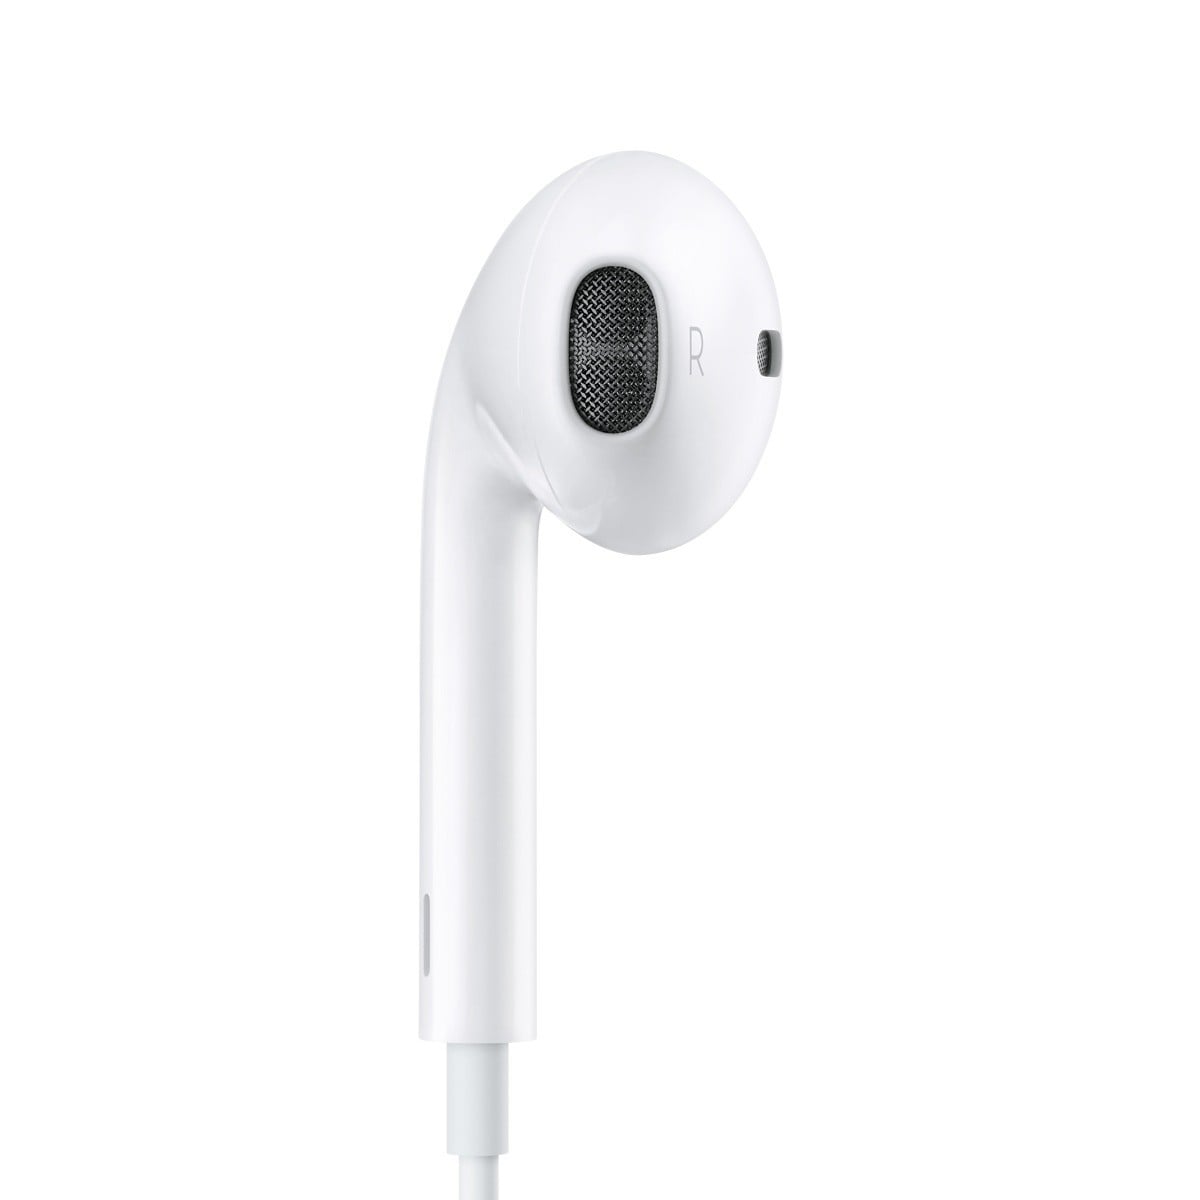 Elgiganten Apple Airpods Flash Sales, UP TO 57% OFF | lavalldelord.com